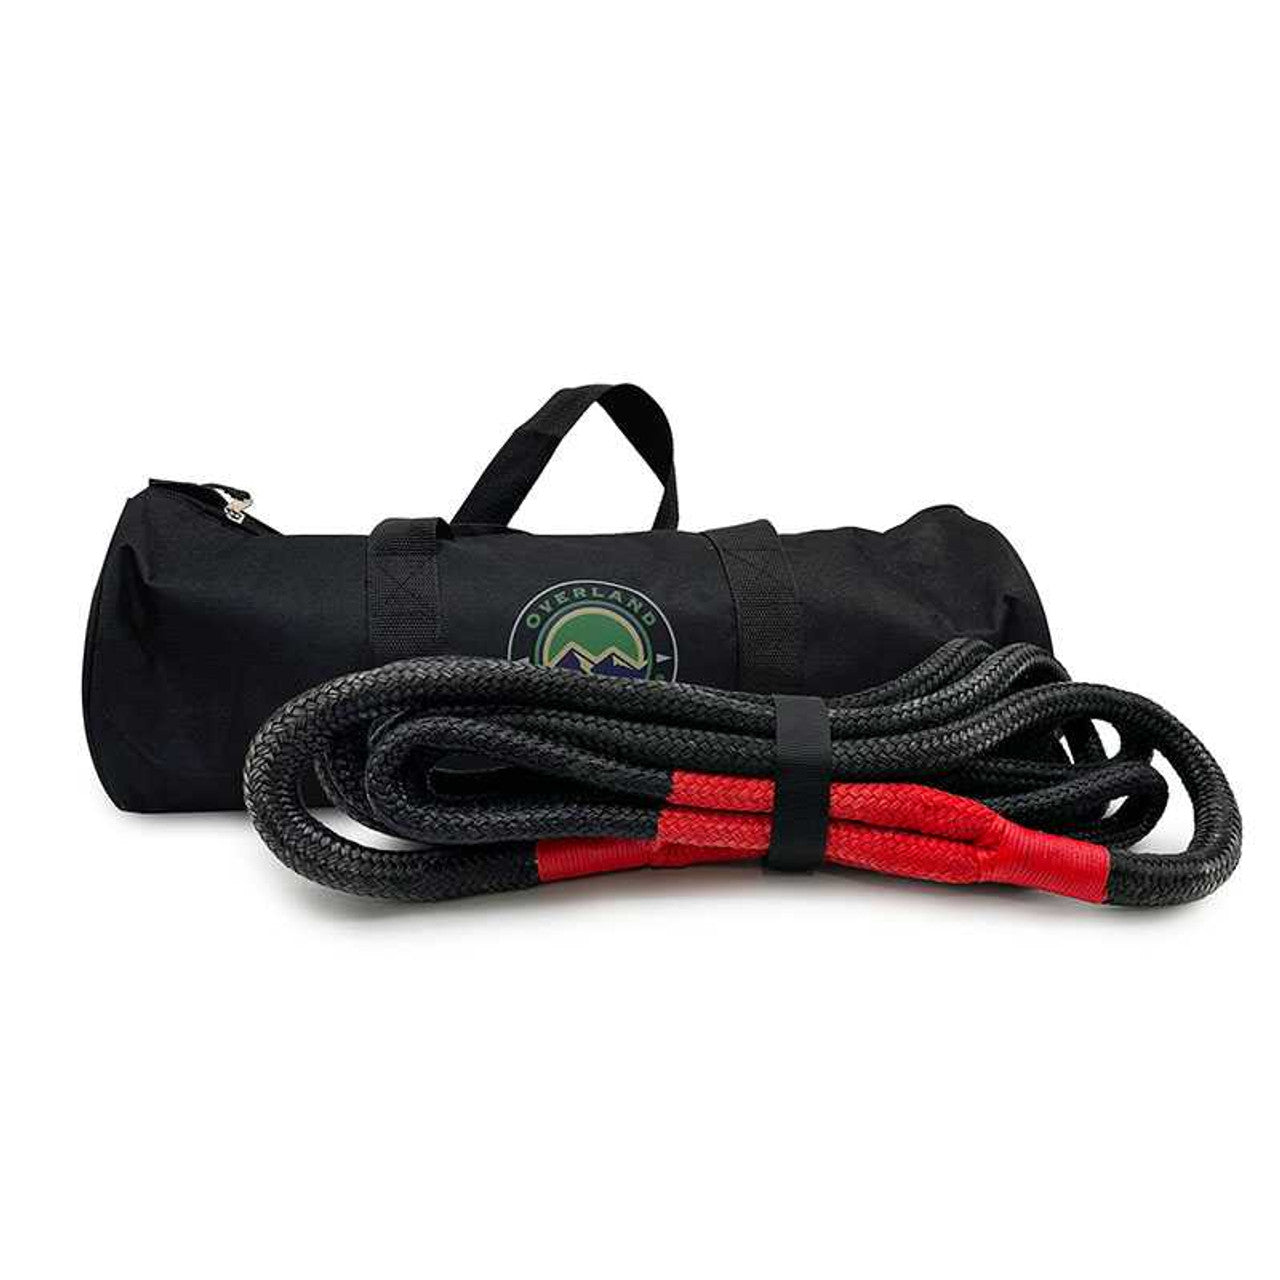 OVS Brute Kinetic Recovery Rope 7/8" x 20' With Storage Bag 19009920